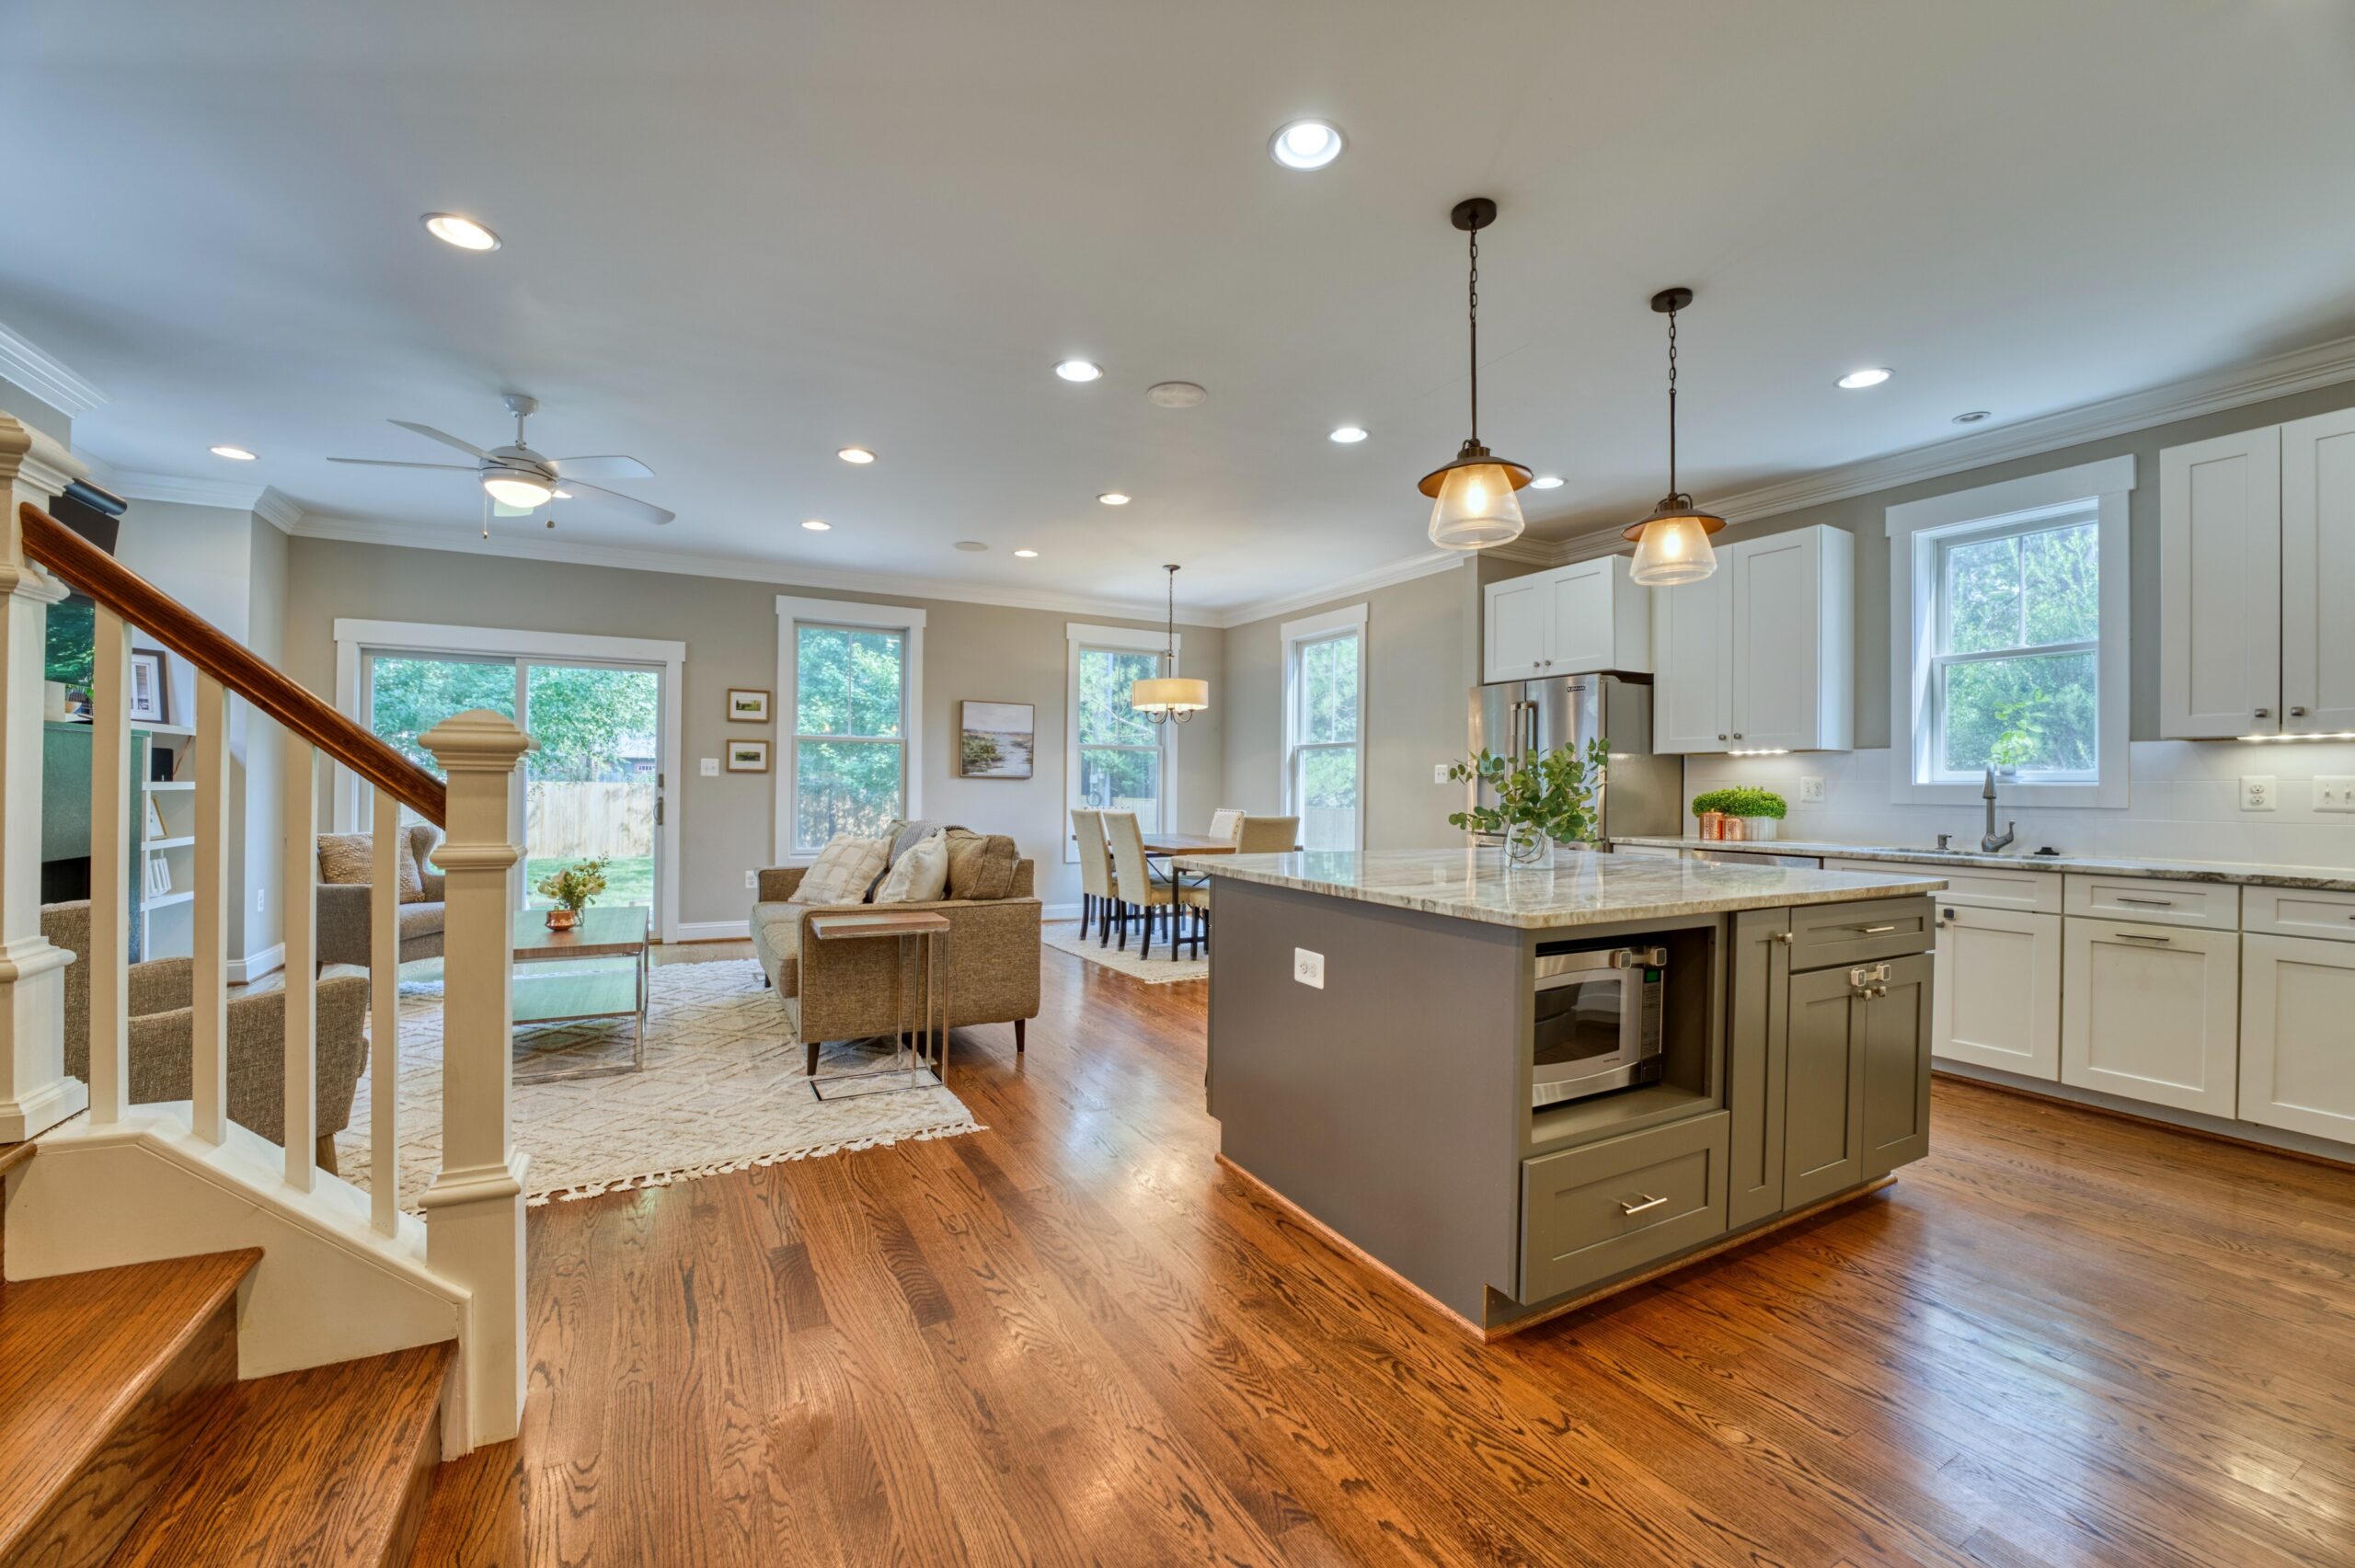 Professional interior photo of 505 N West St - showing the view from the front door with kitchen flowing into family room